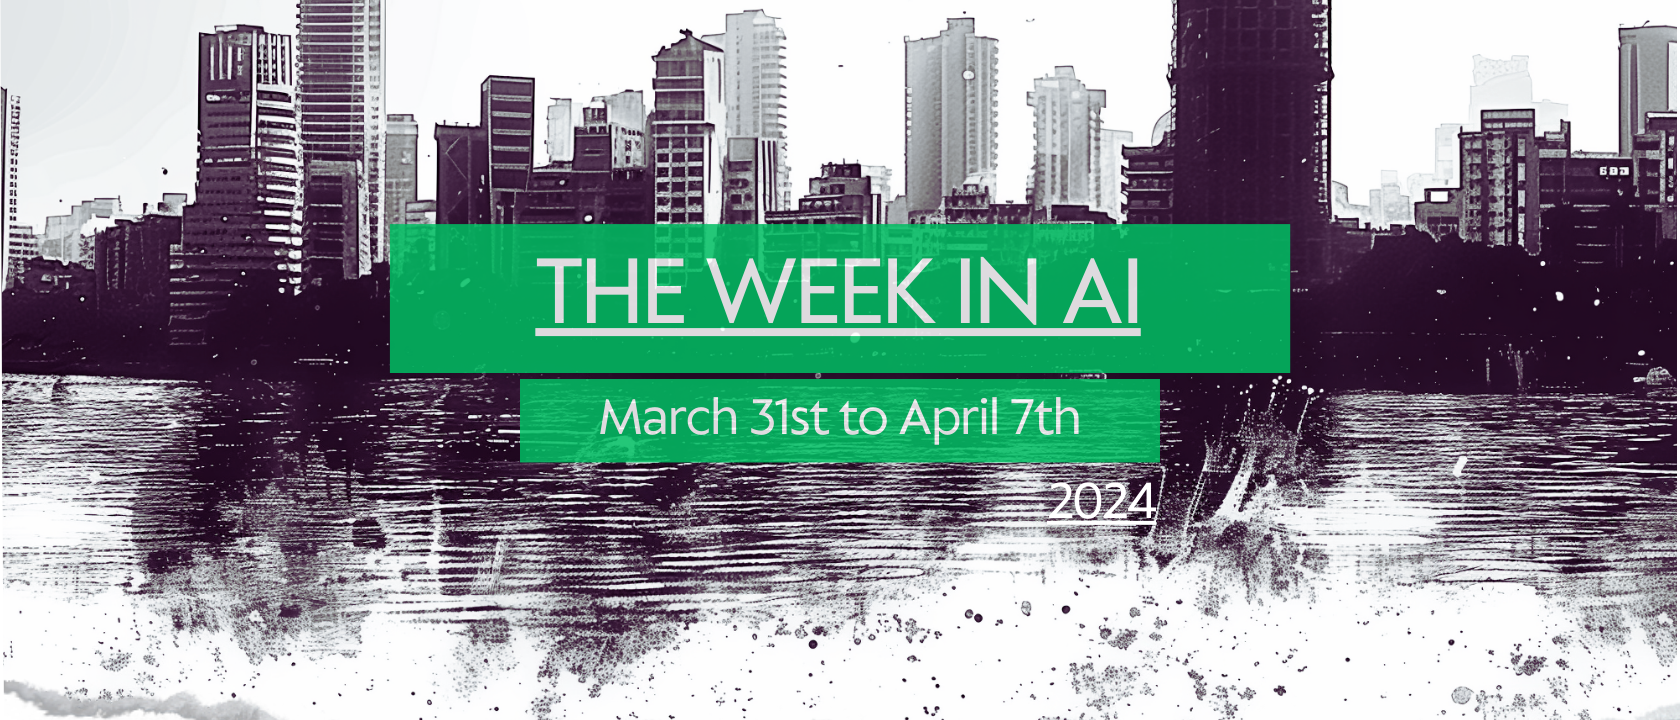 The Week in AI – 7th April ’24 – a quick summary